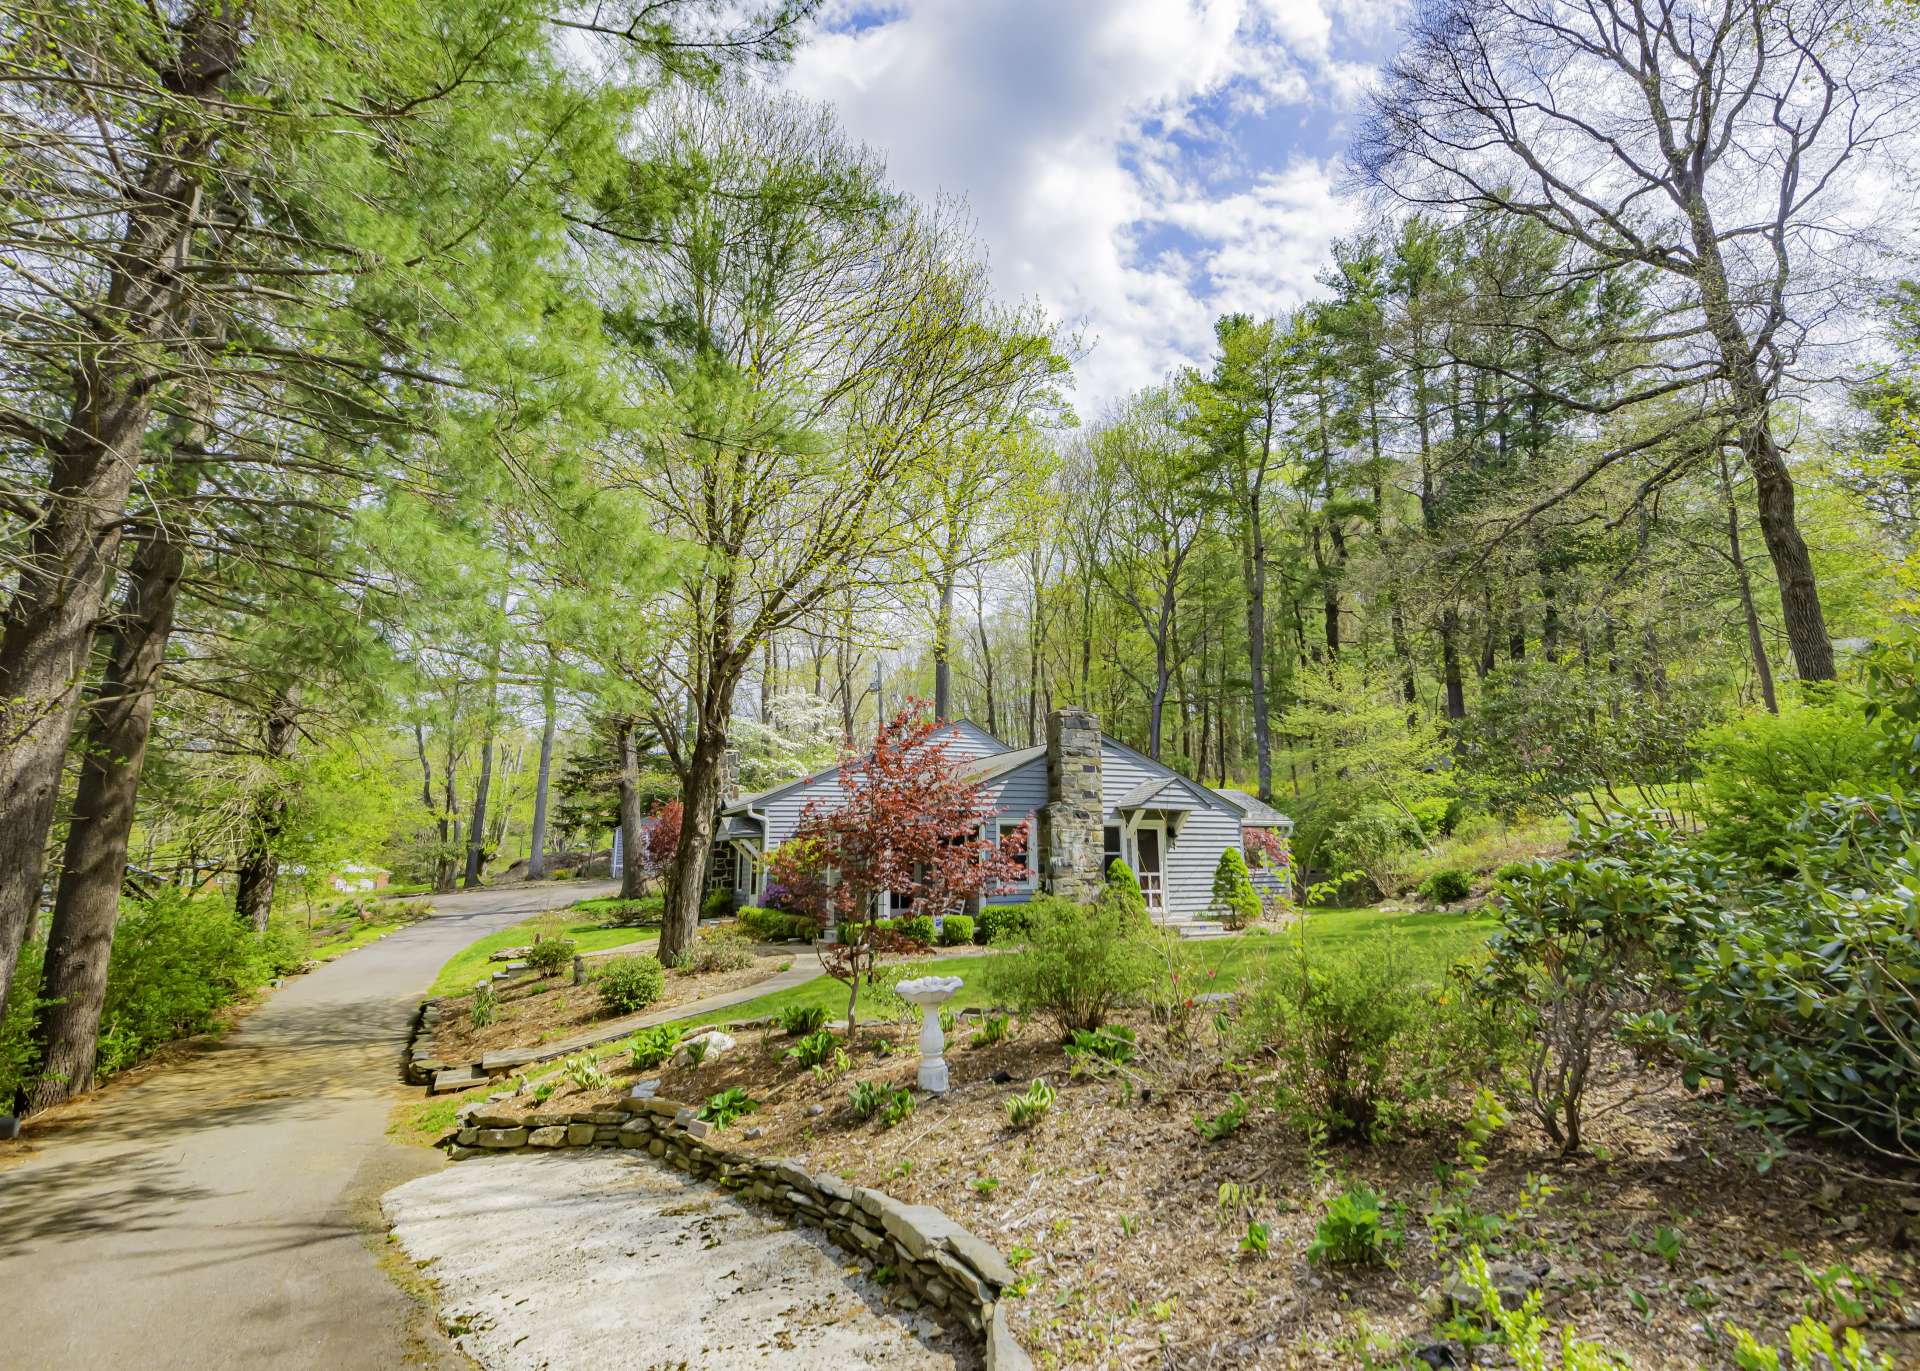 Call today for more information or an appointment to view this charming mountain cottage located just minutes from shopping and restaurants in Downtown Jefferson and West Jefferson.